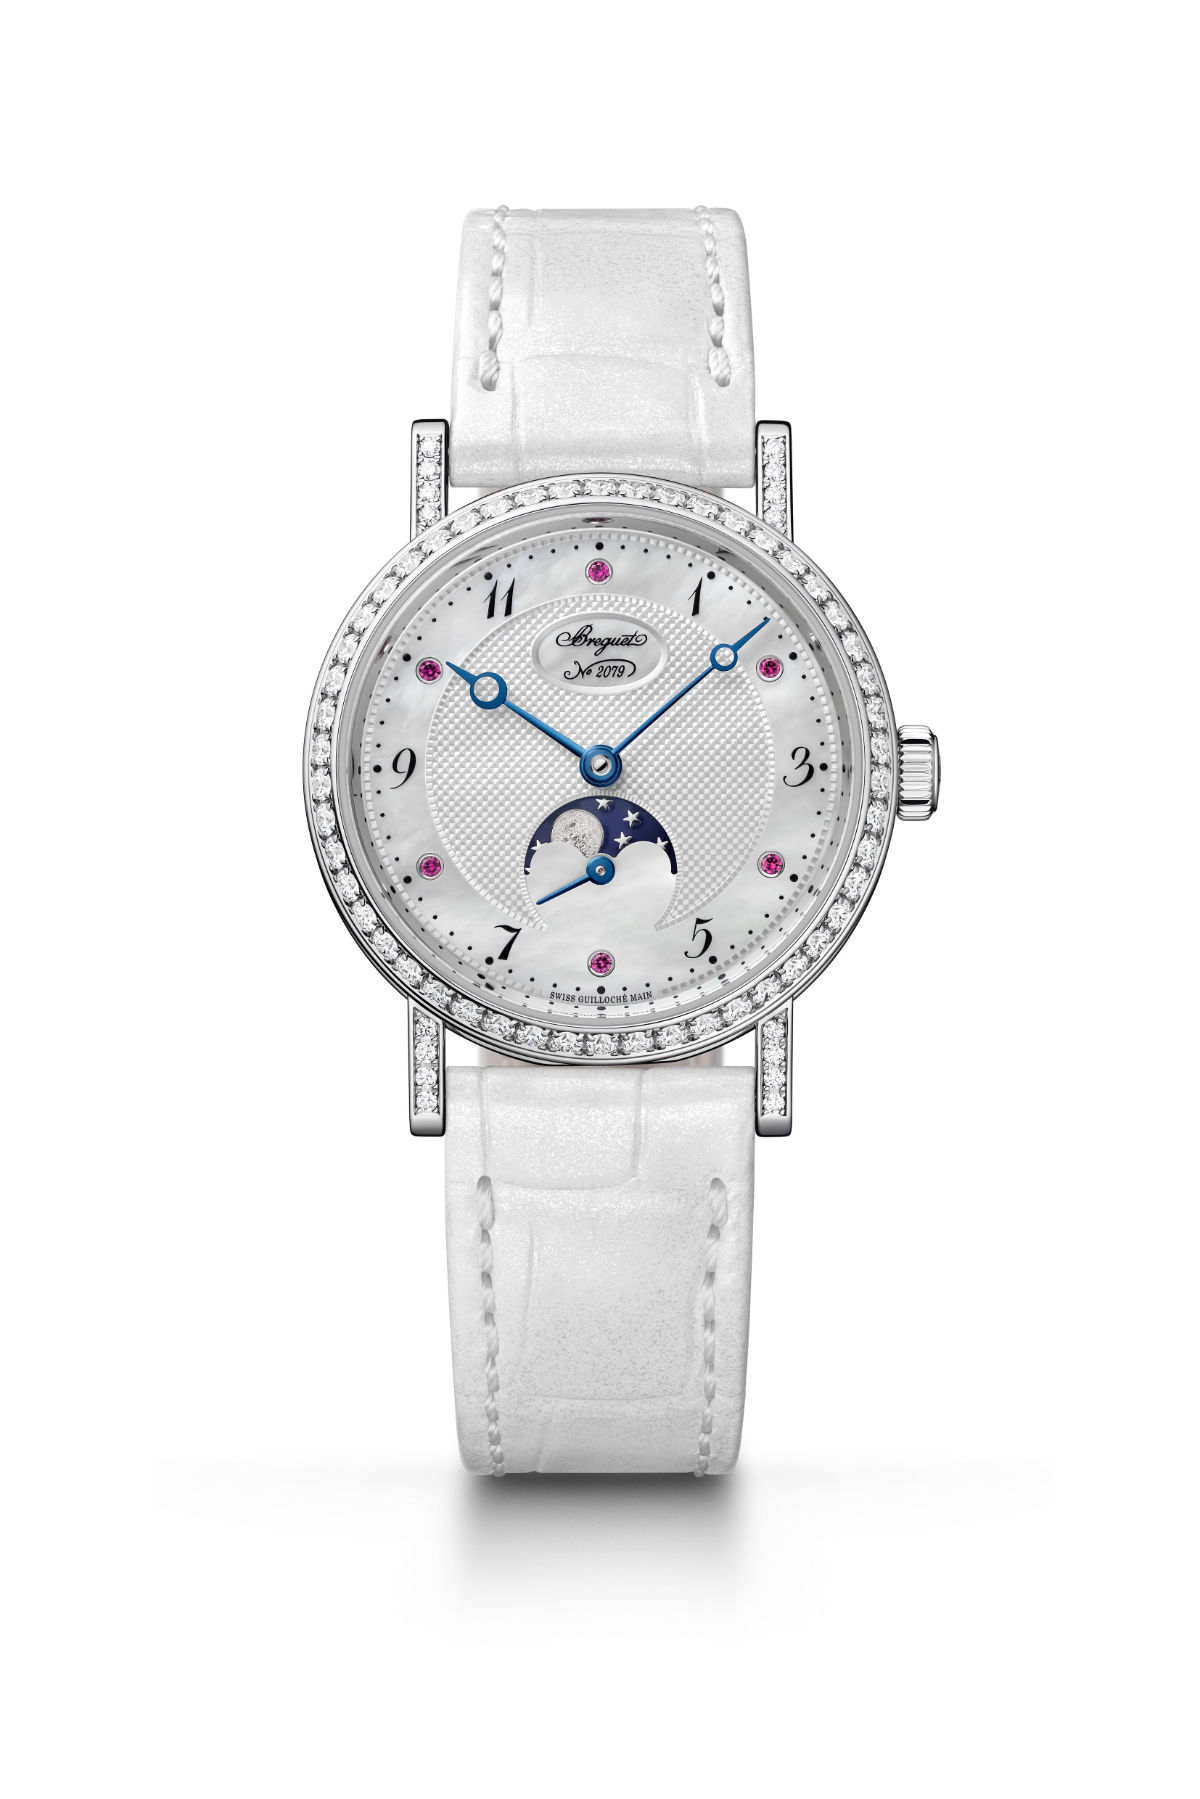 Breguet Presents Its New Classique Phase De Lune 9085 Watch - A Valentine’s Day Edition